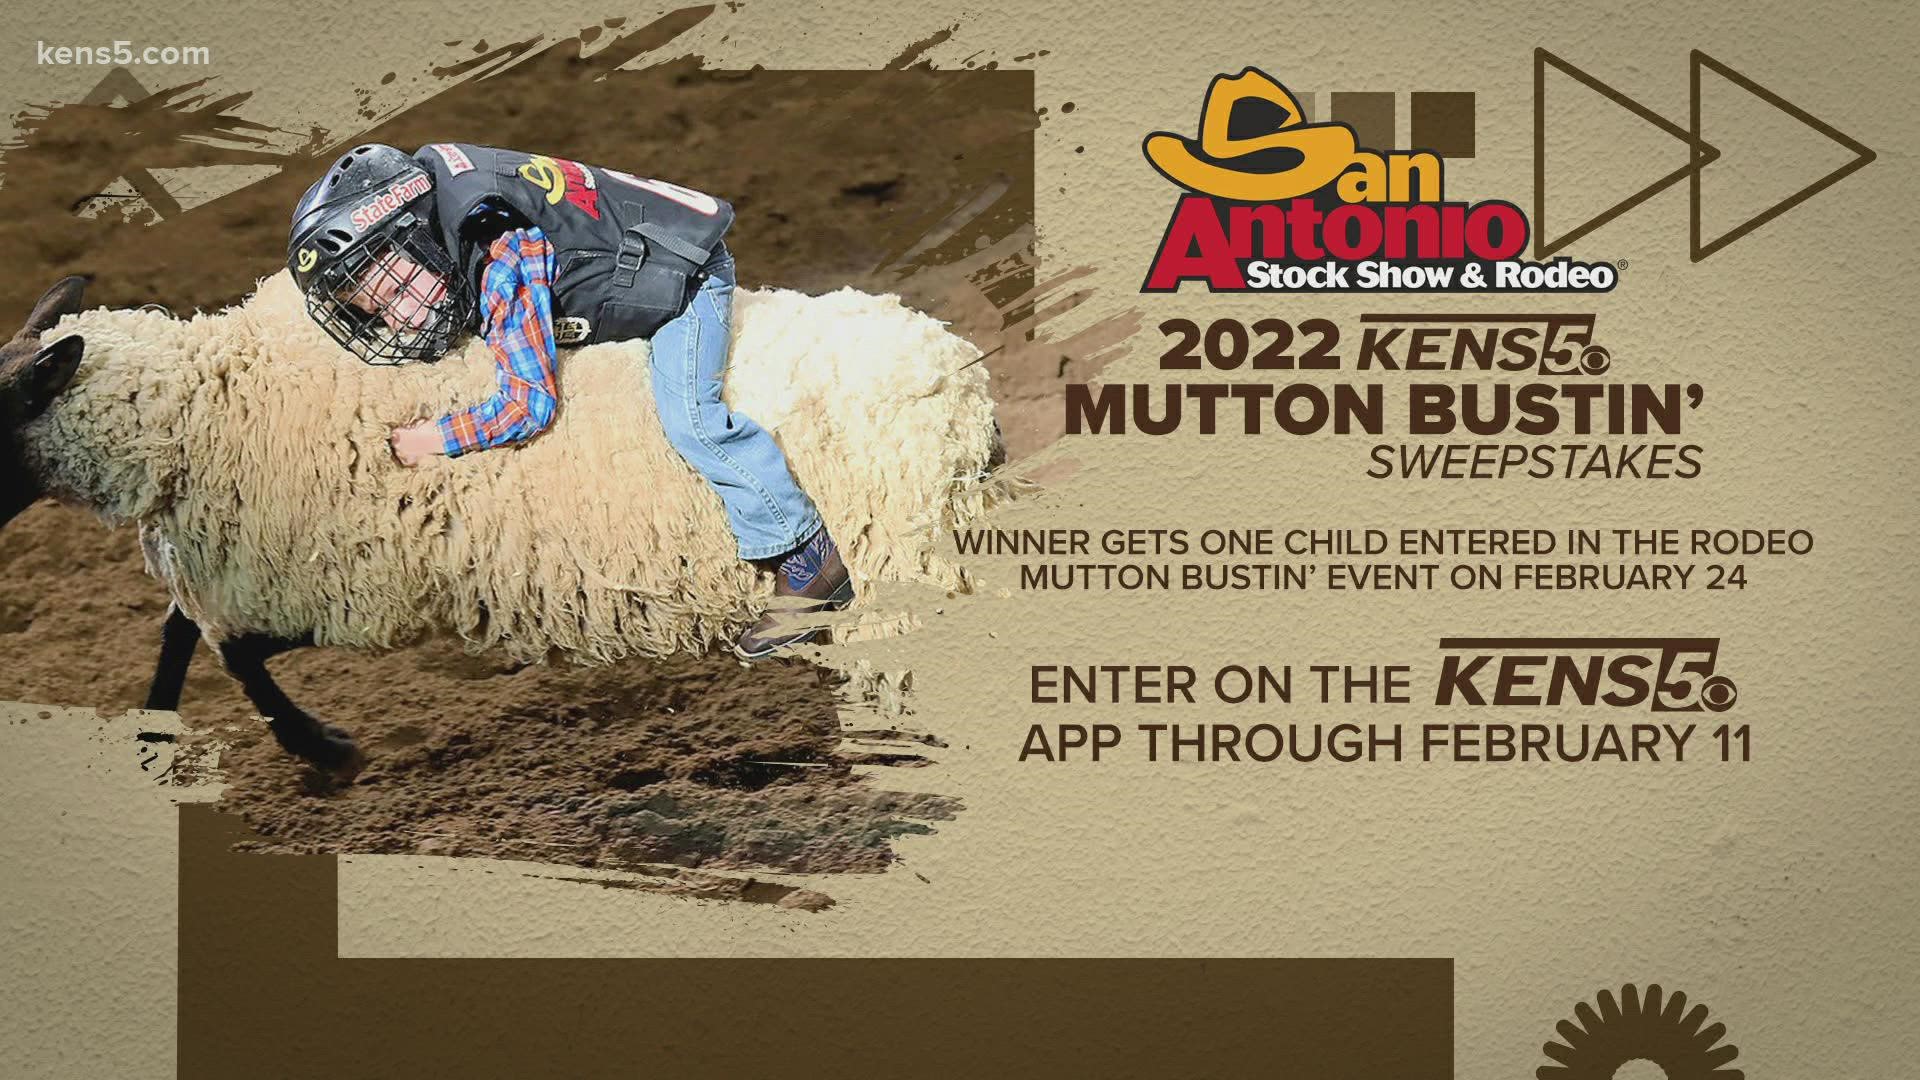 You could win one entry in the competition plus four tickets to attend the 2022 San Antonio Stock Show & Rodeo.